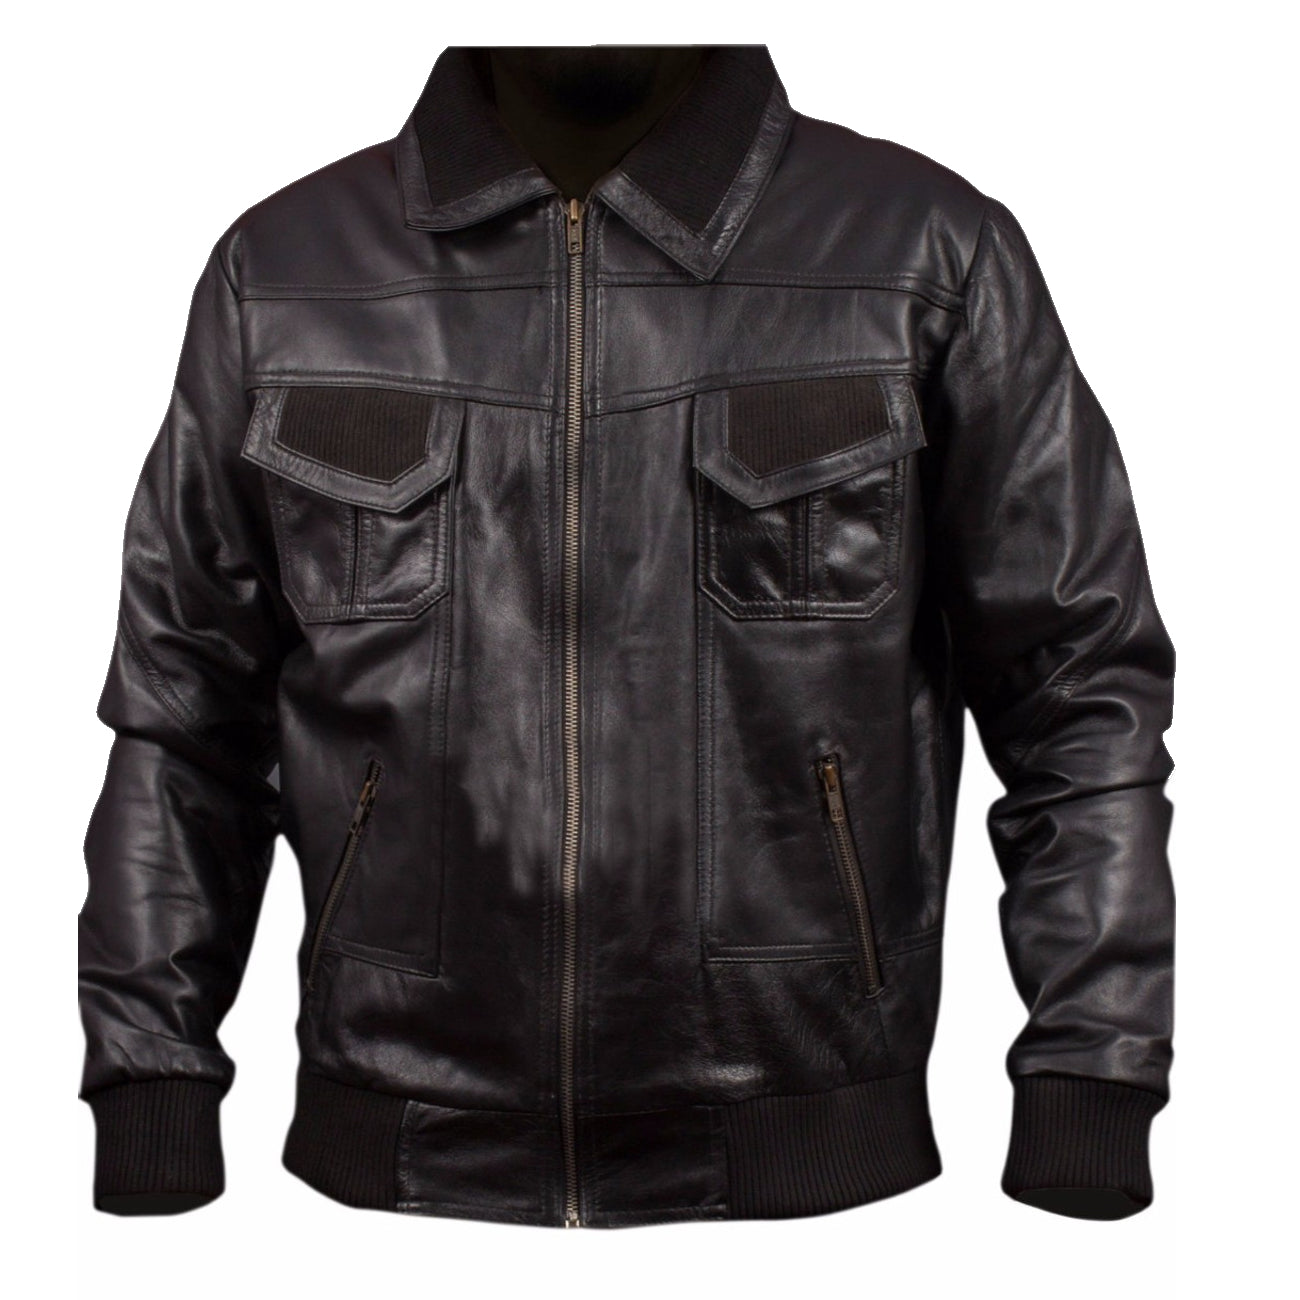 American Bomber Leather Jacket